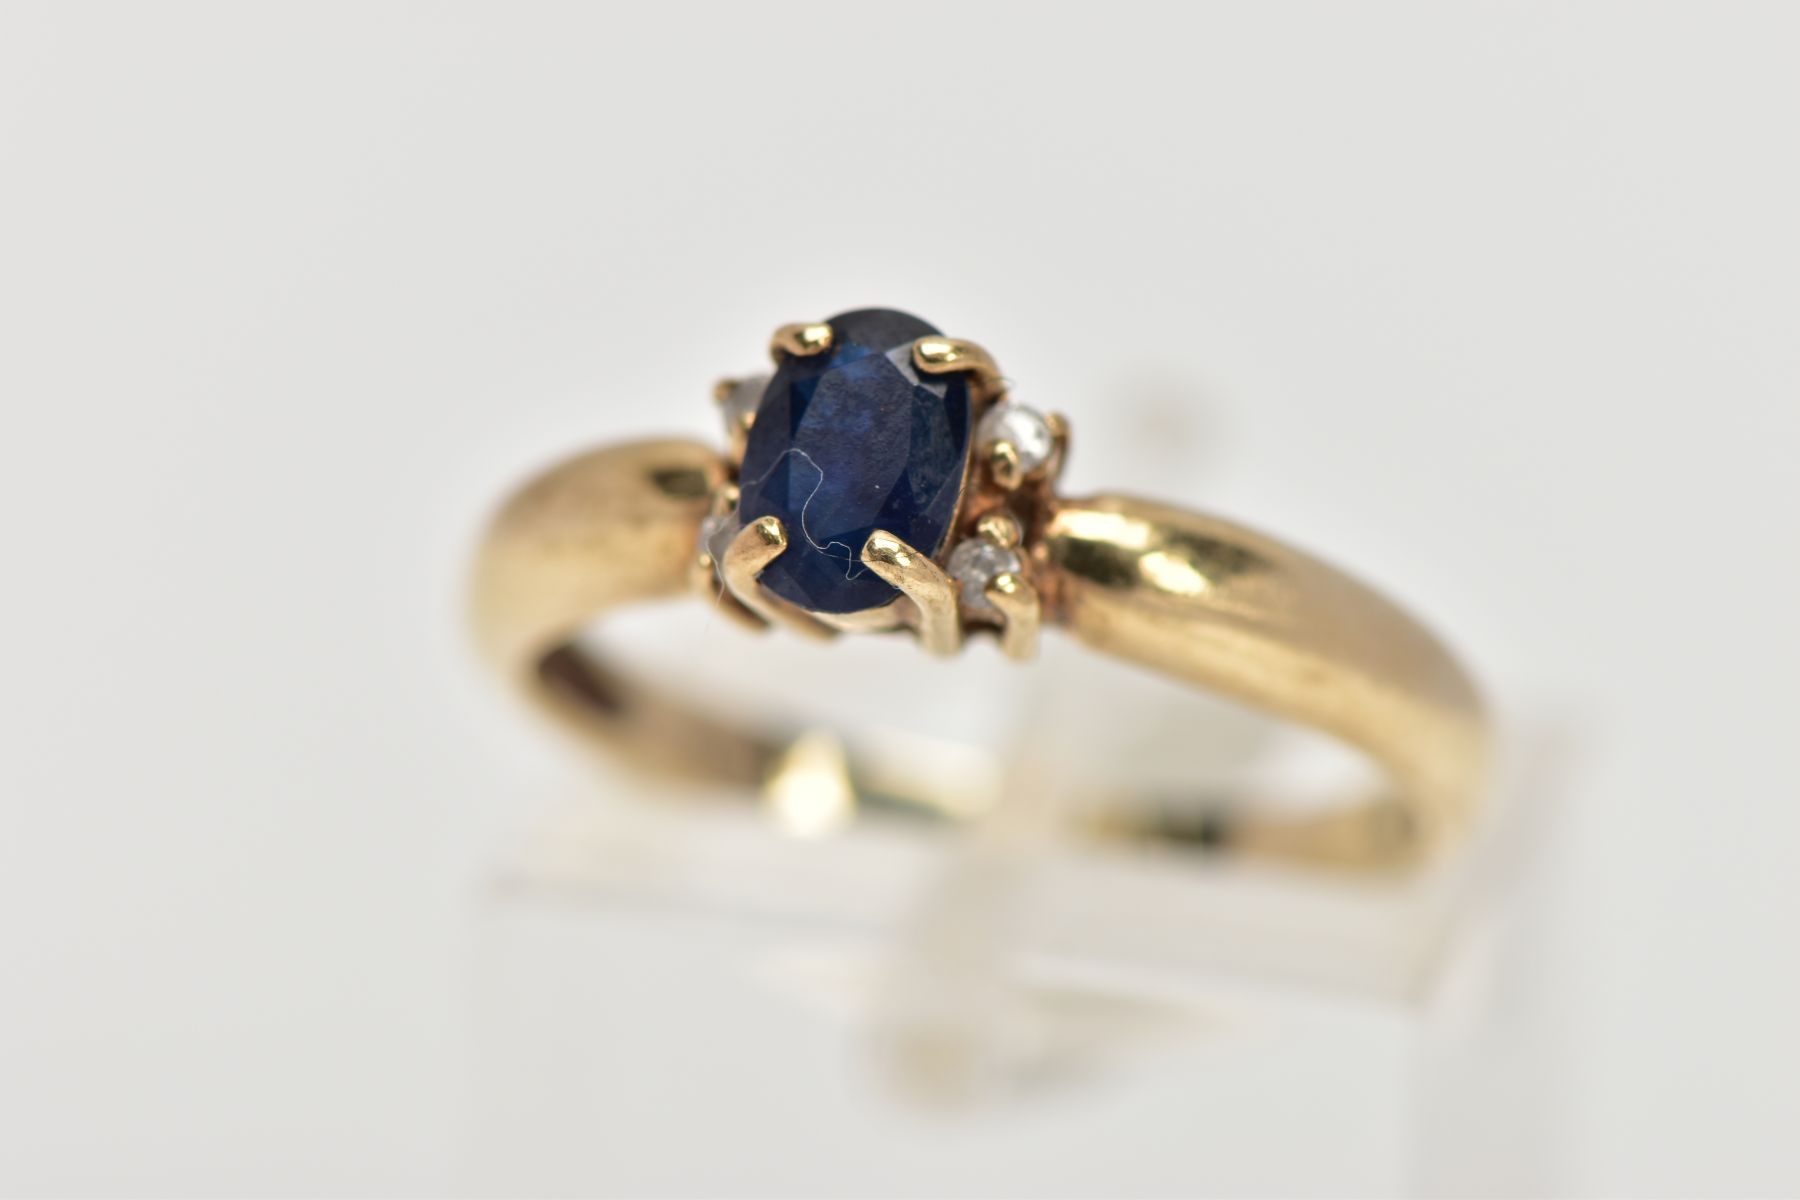 A 9CT GOLD SAPPHIRE AND DIAMOND RING, centring on an oval cut blue sapphire, flanked with four round